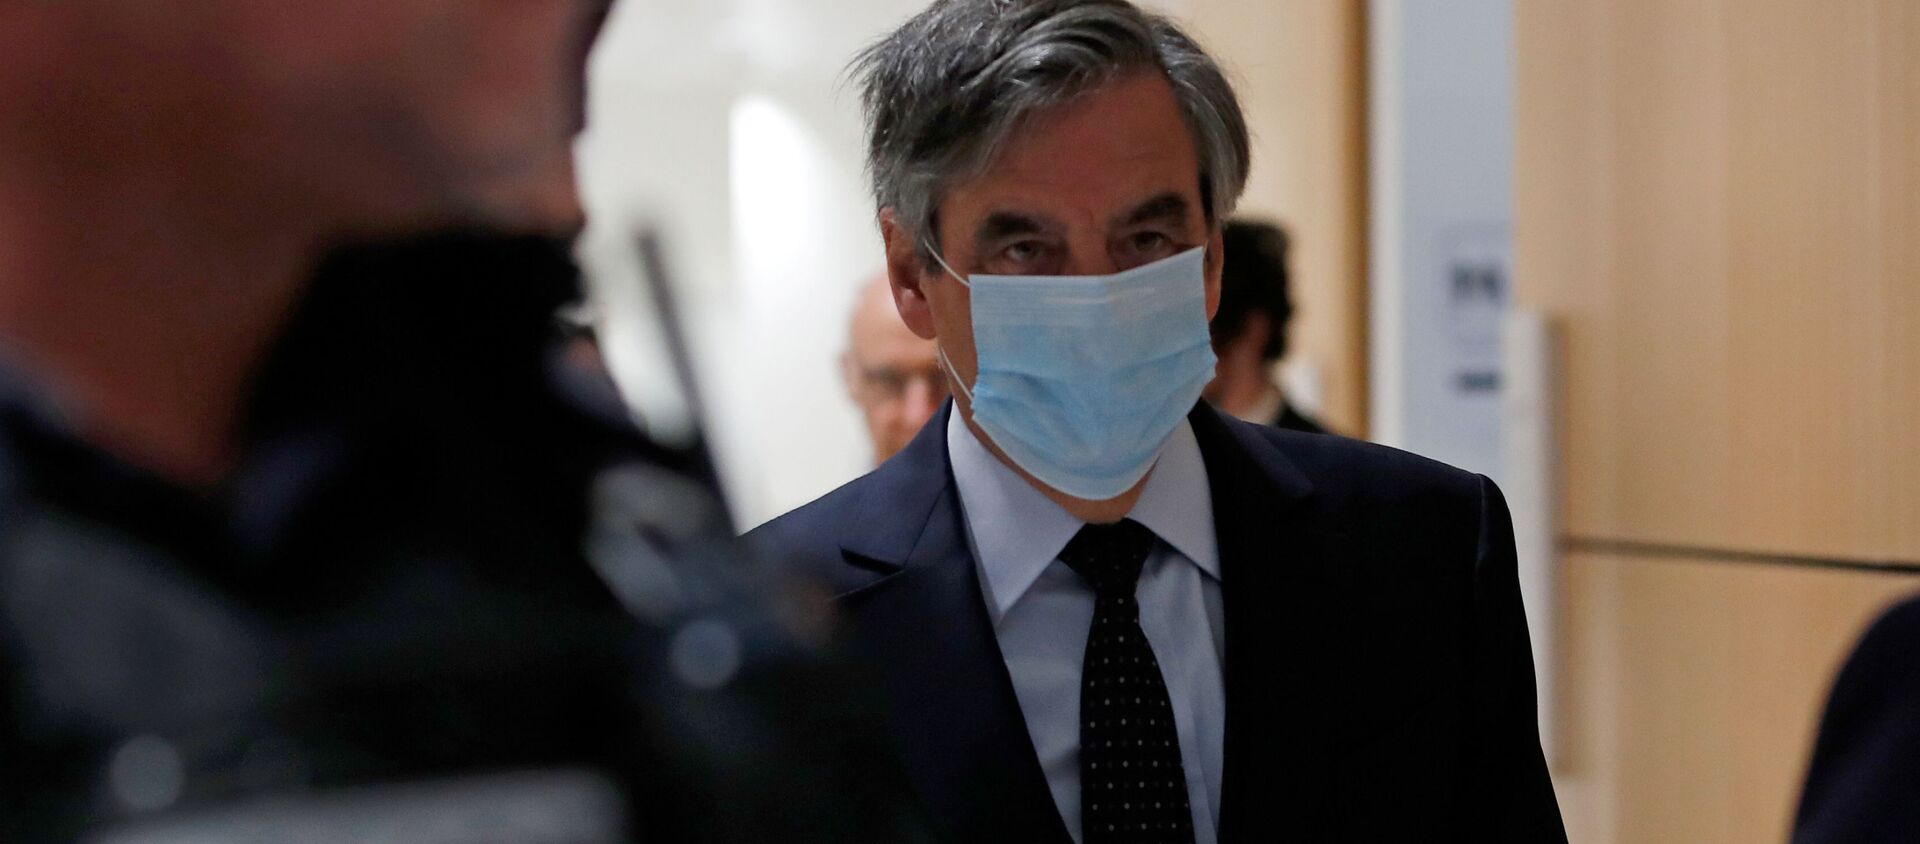 Former French prime minister Francois Fillon, wearing a protective face mask, arrives for the verdict in his trial over a fake jobs scandal at the courthouse in Paris, France, June 29, 2020 - Sputnik International, 1920, 29.06.2020